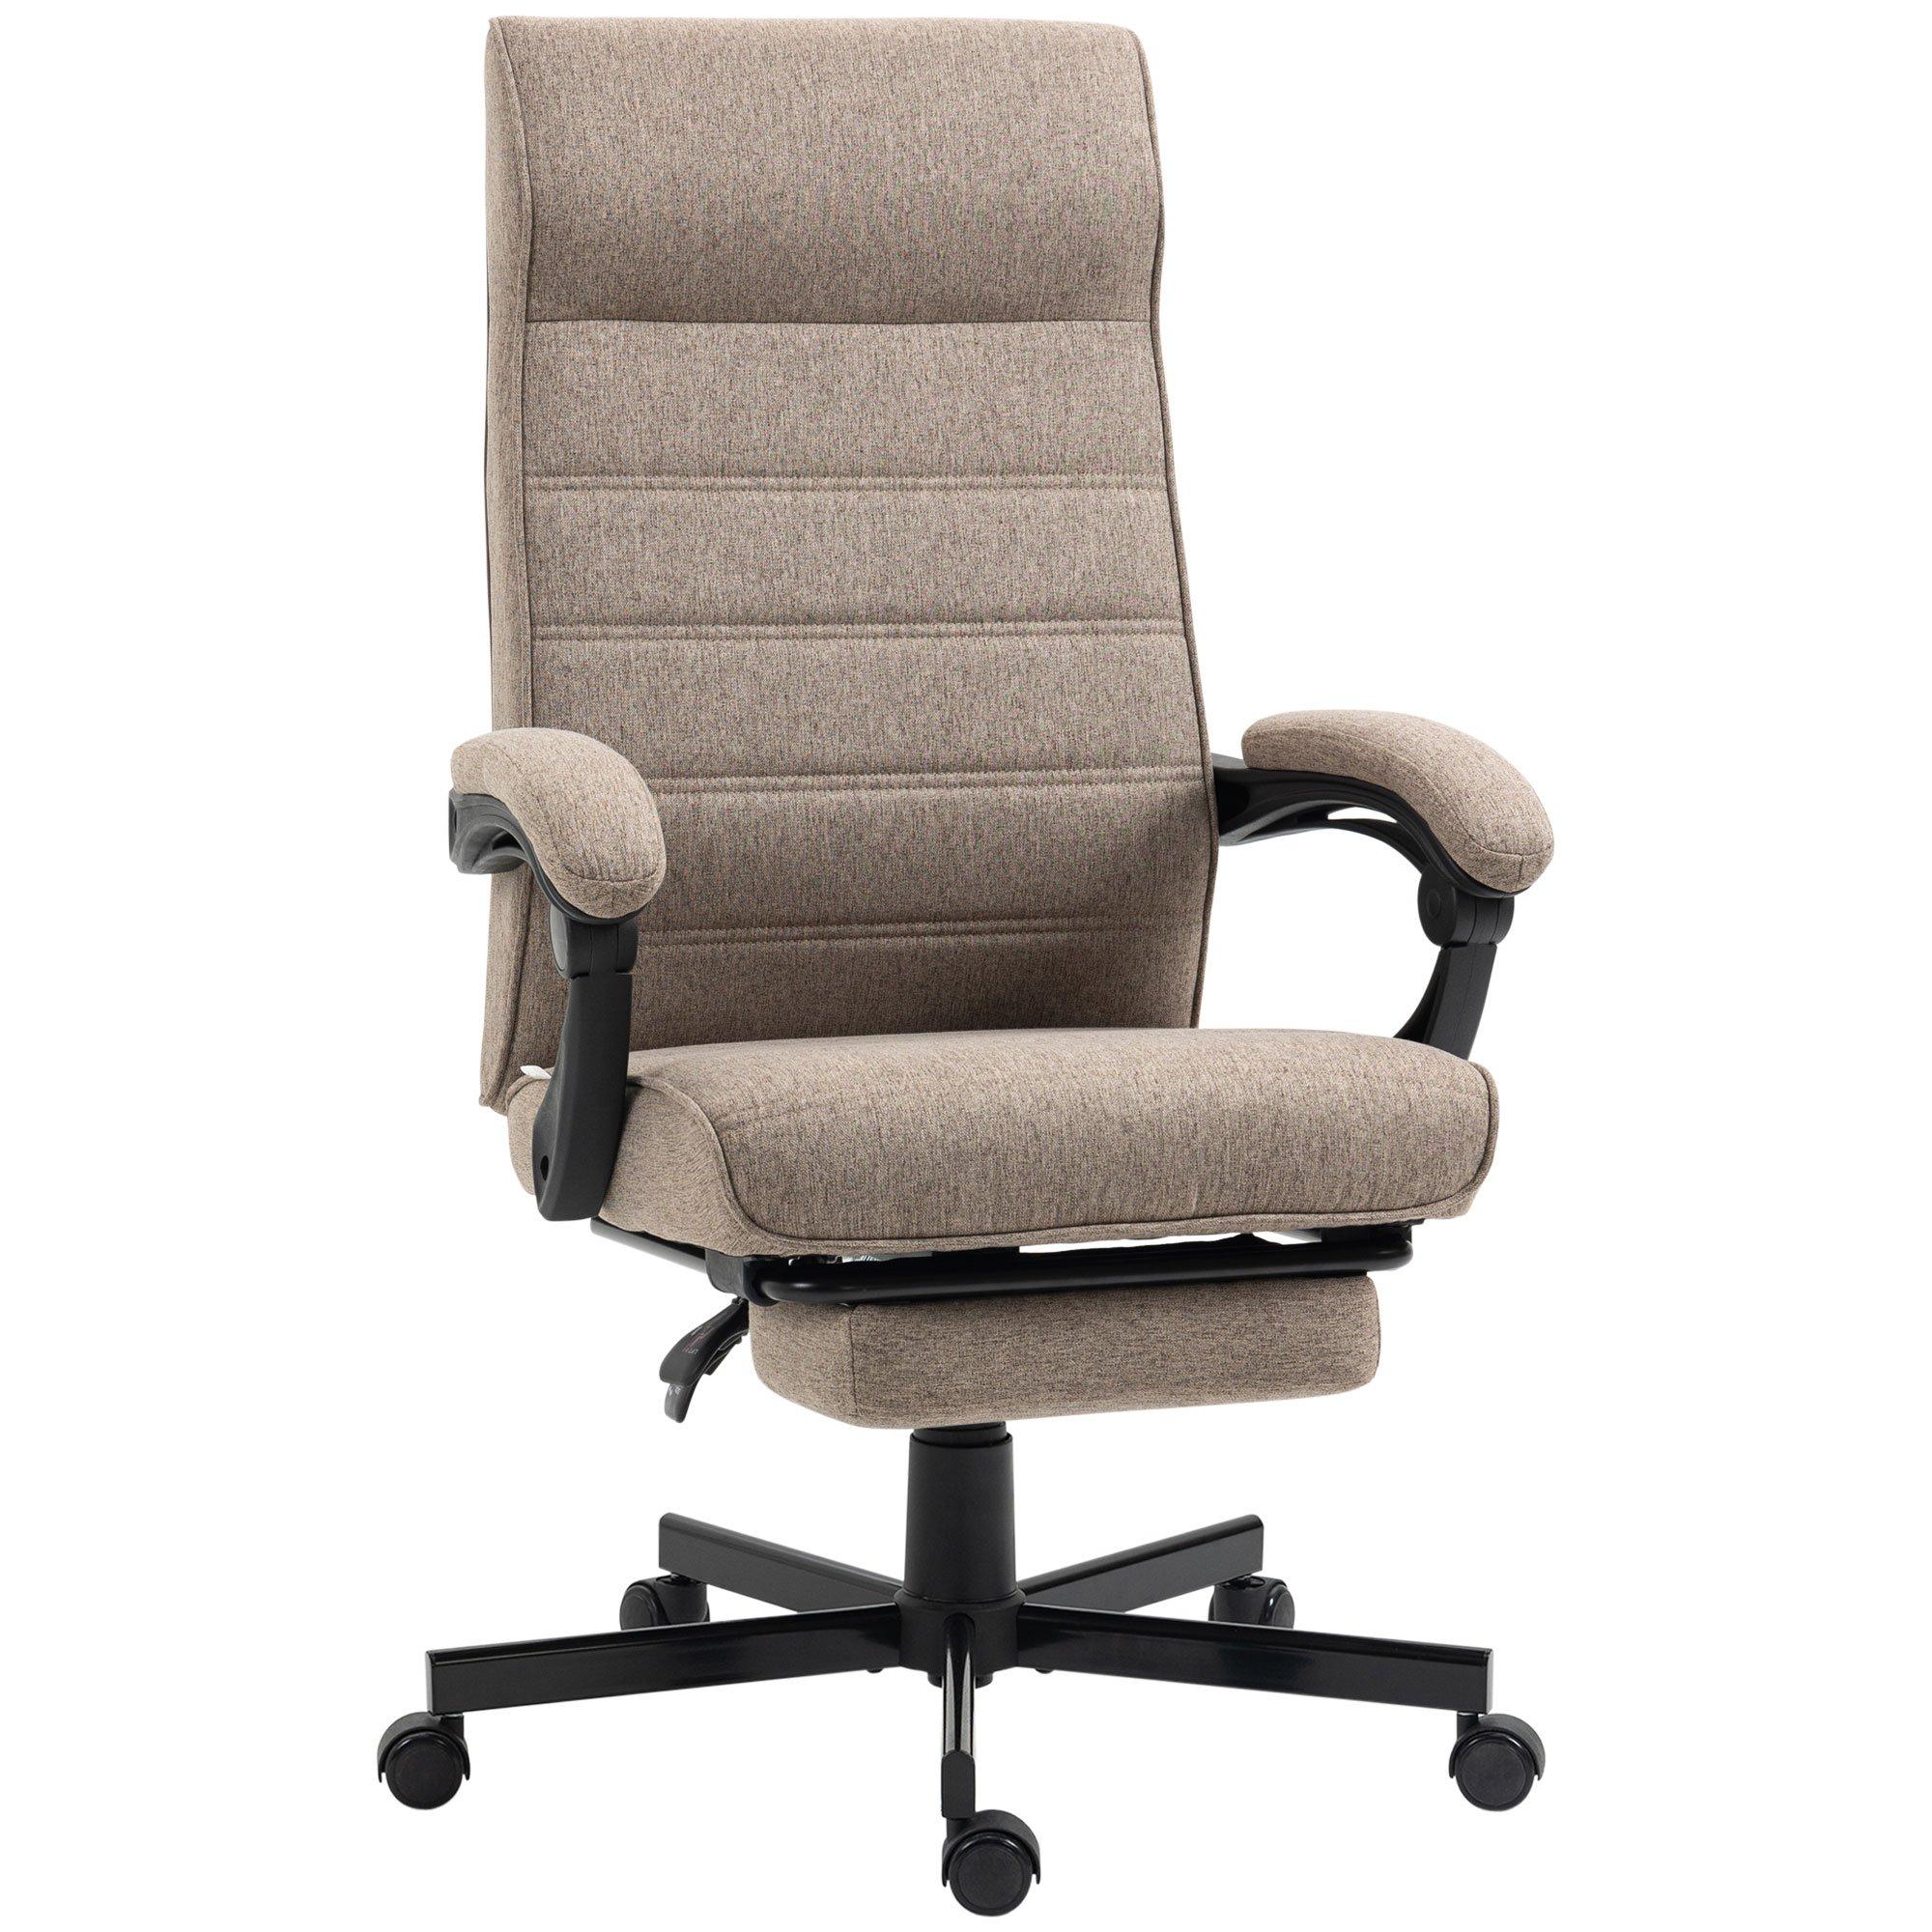 Home Office Chair High-Back Reclining Chair for Bedroom Study